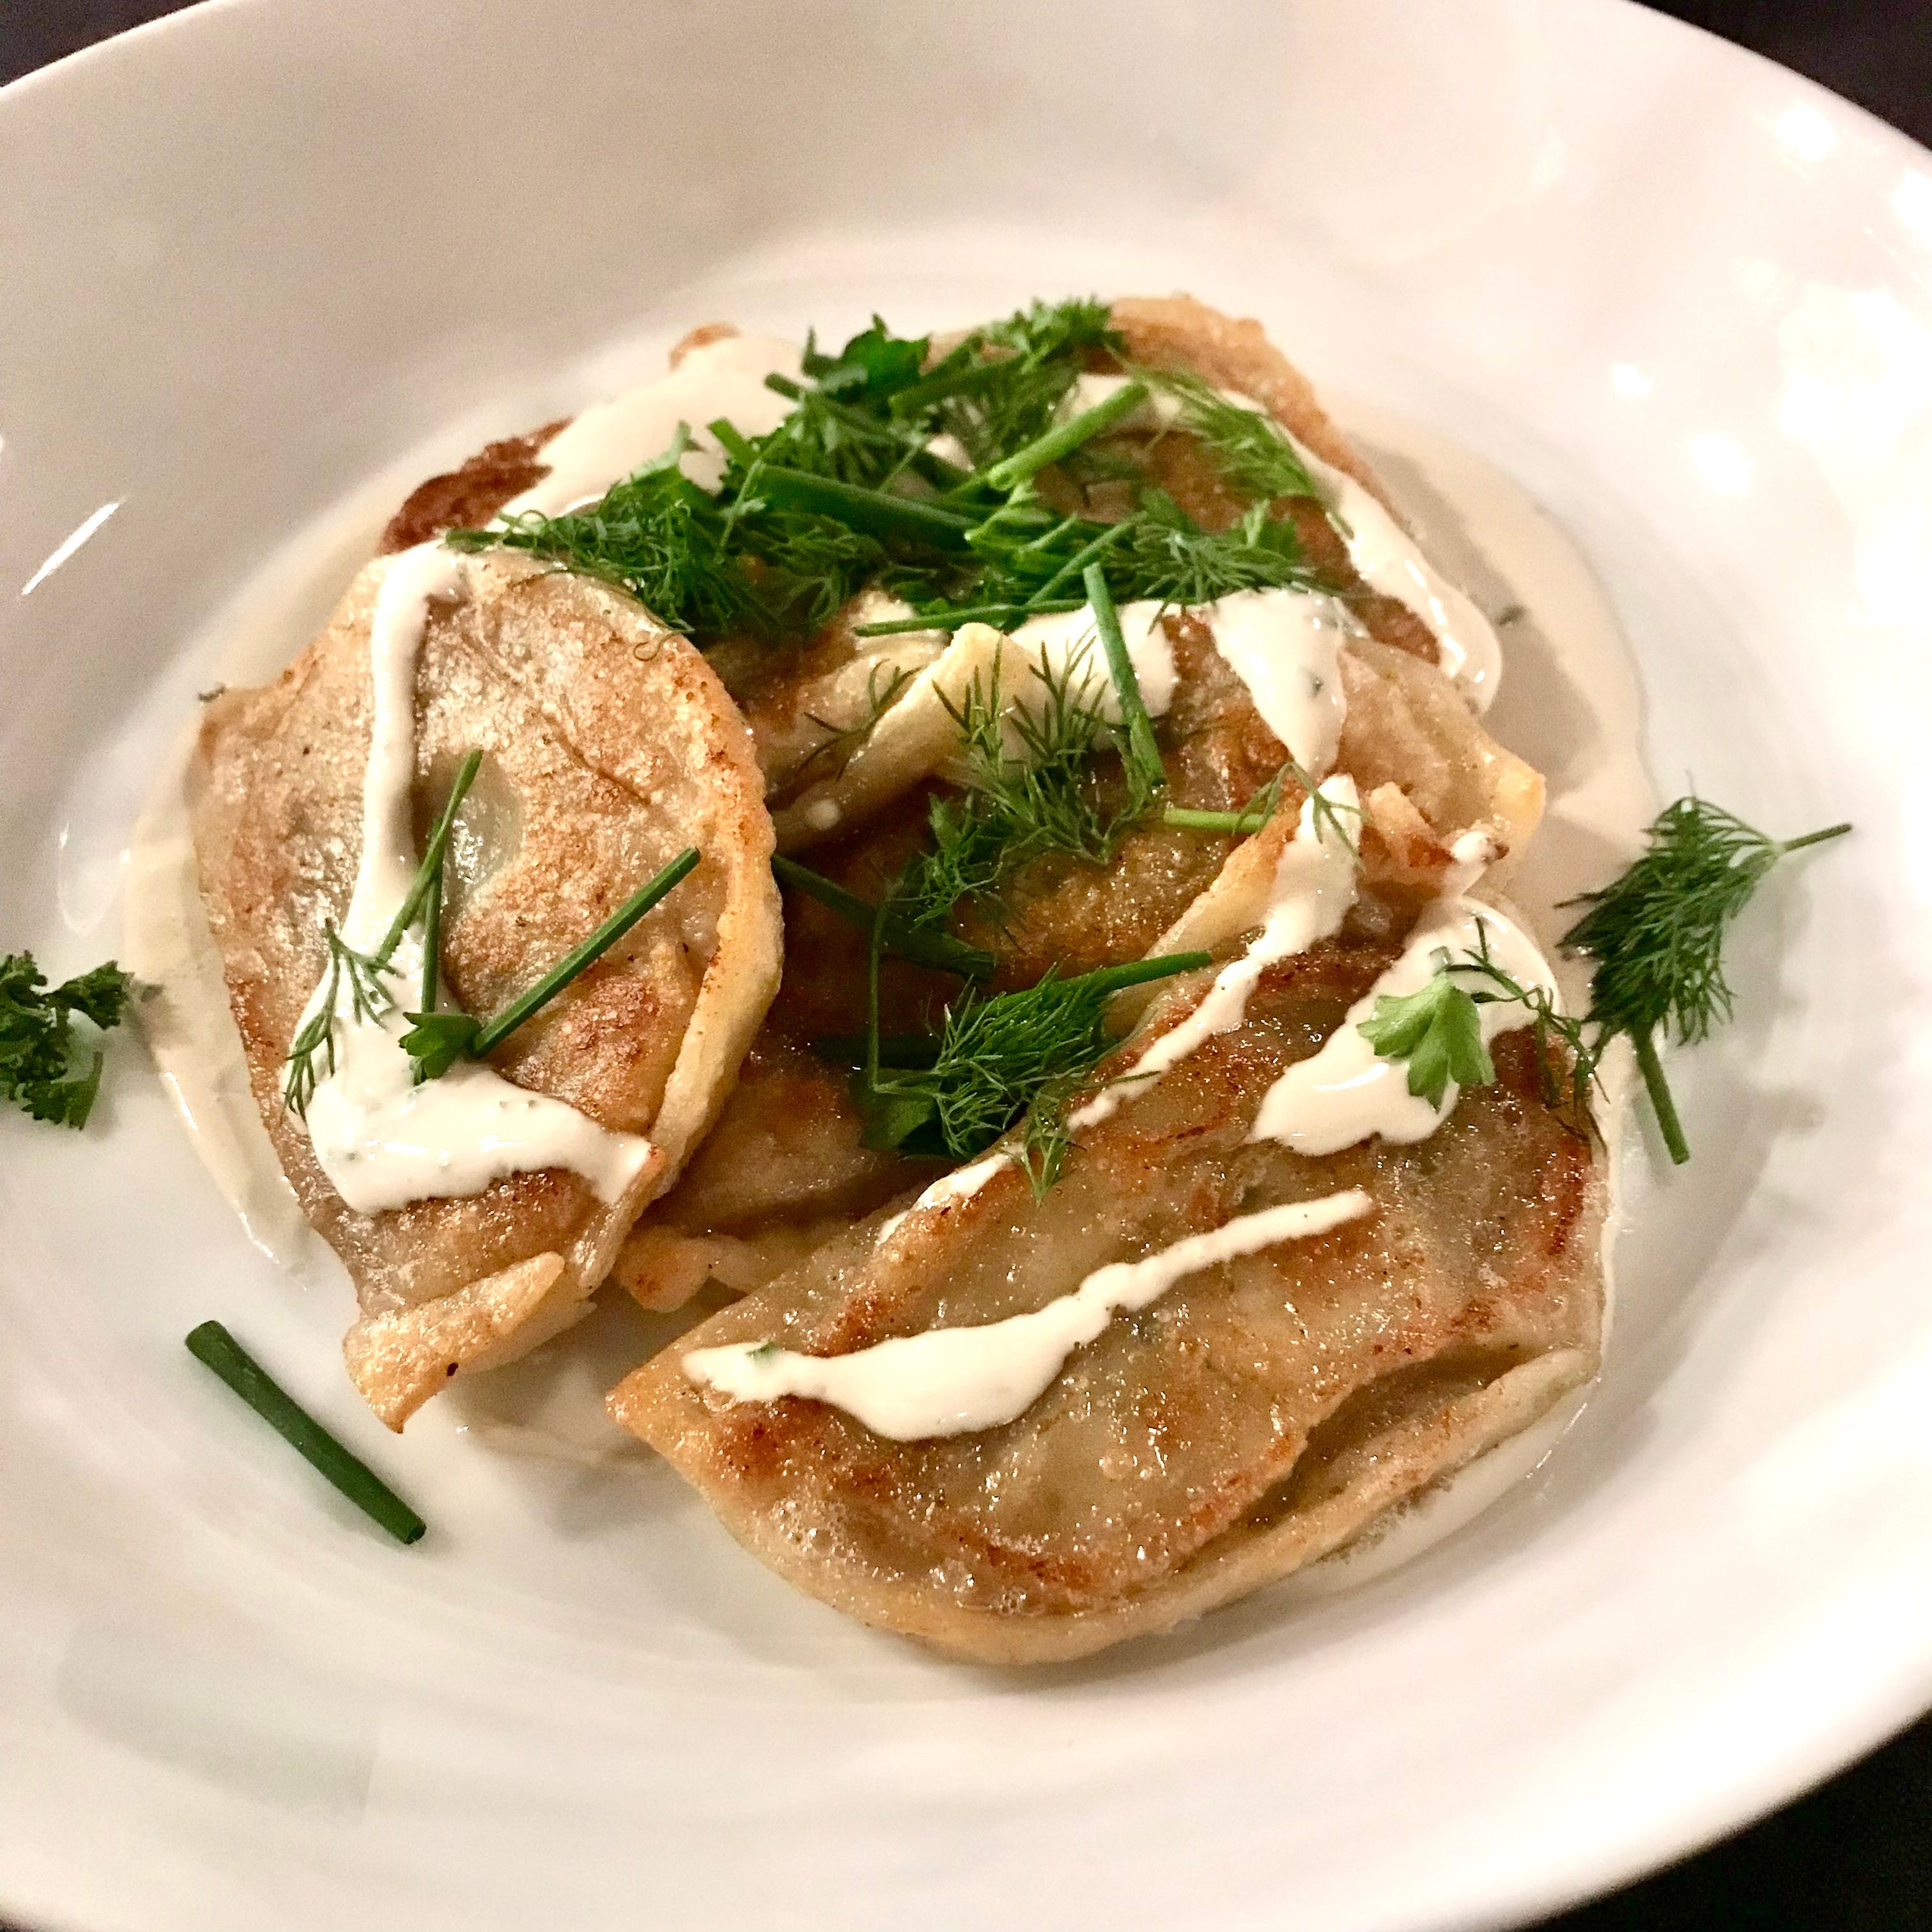 Potato pierogi with fresh herbs and sour cream is one of the small plates at Fool's Errand in the Third Ward.